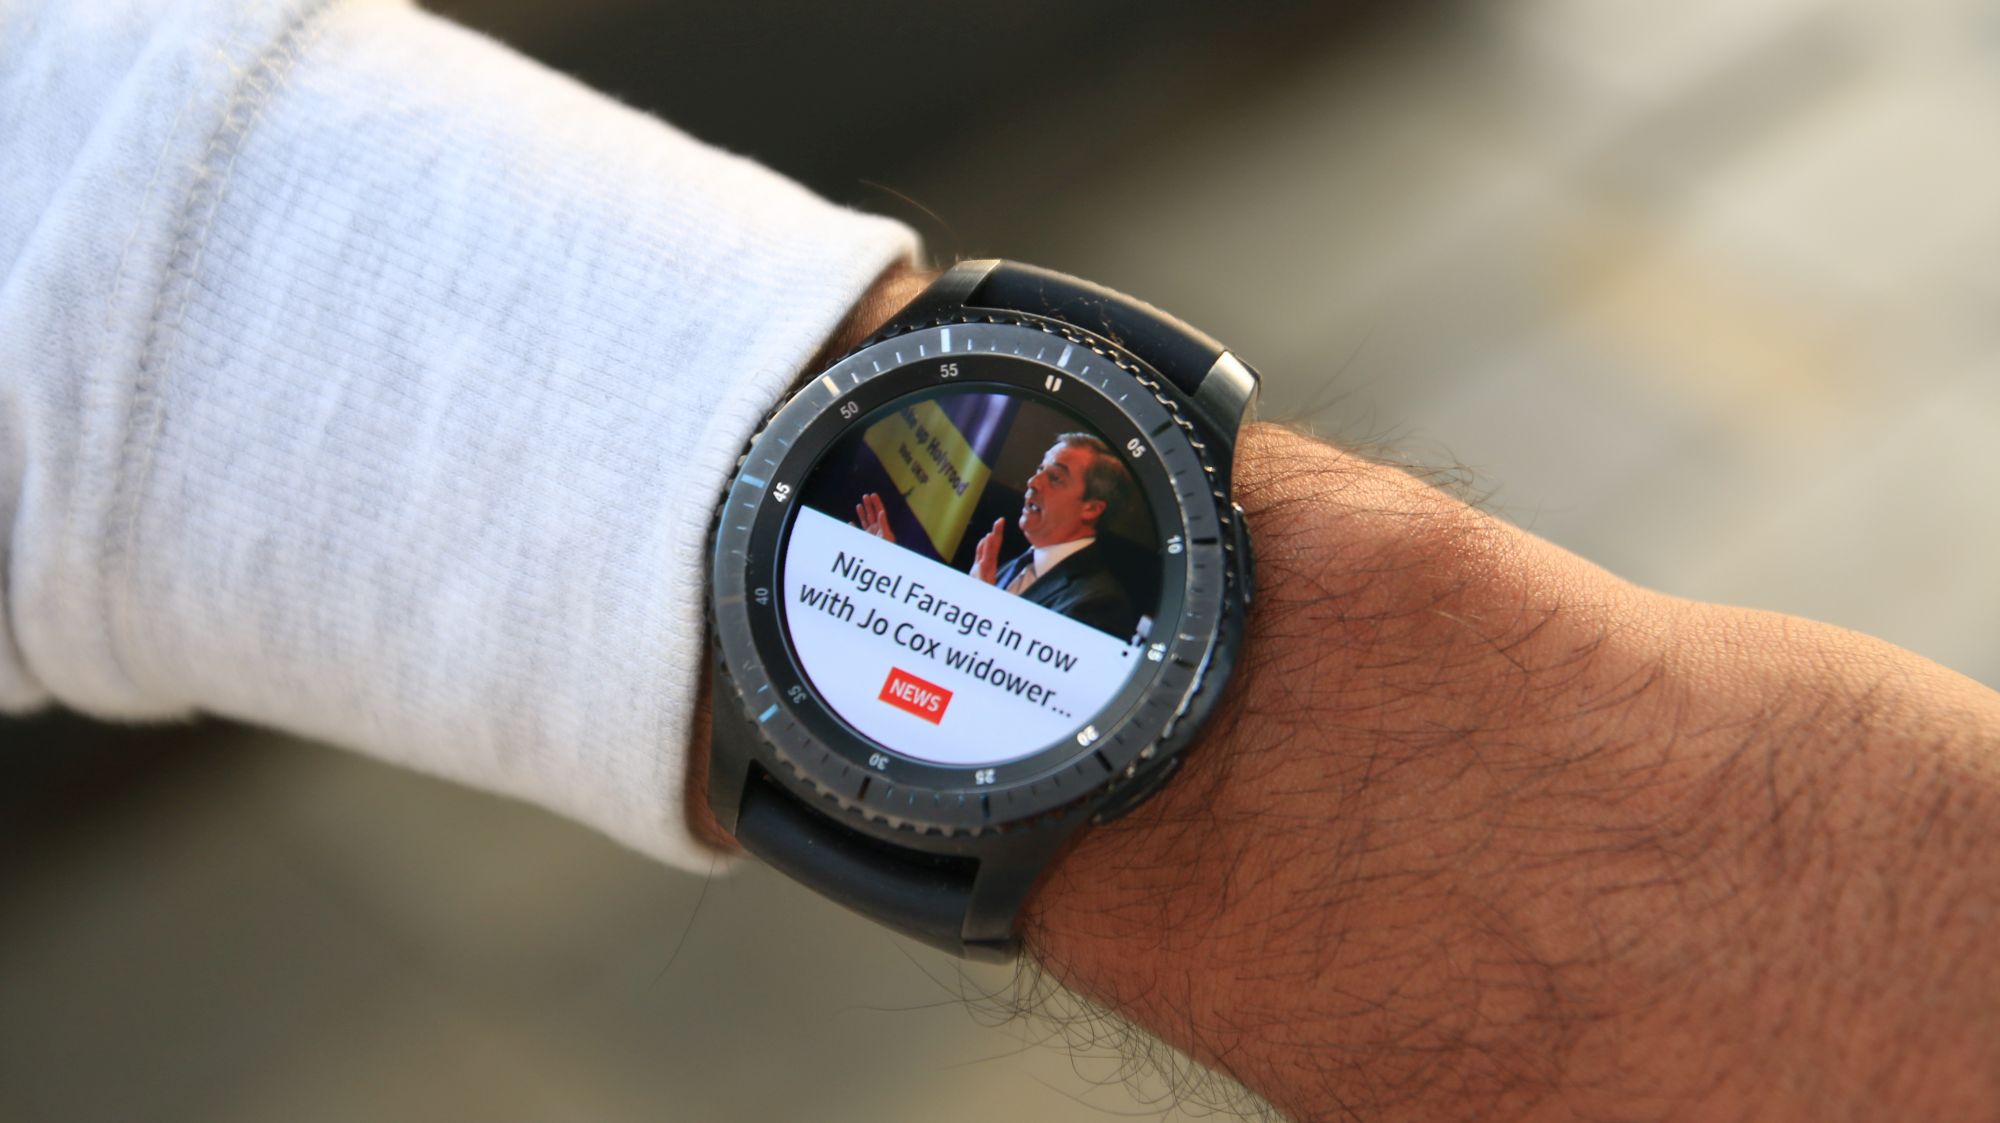 samsung gear s3 iphone compatibility 2018